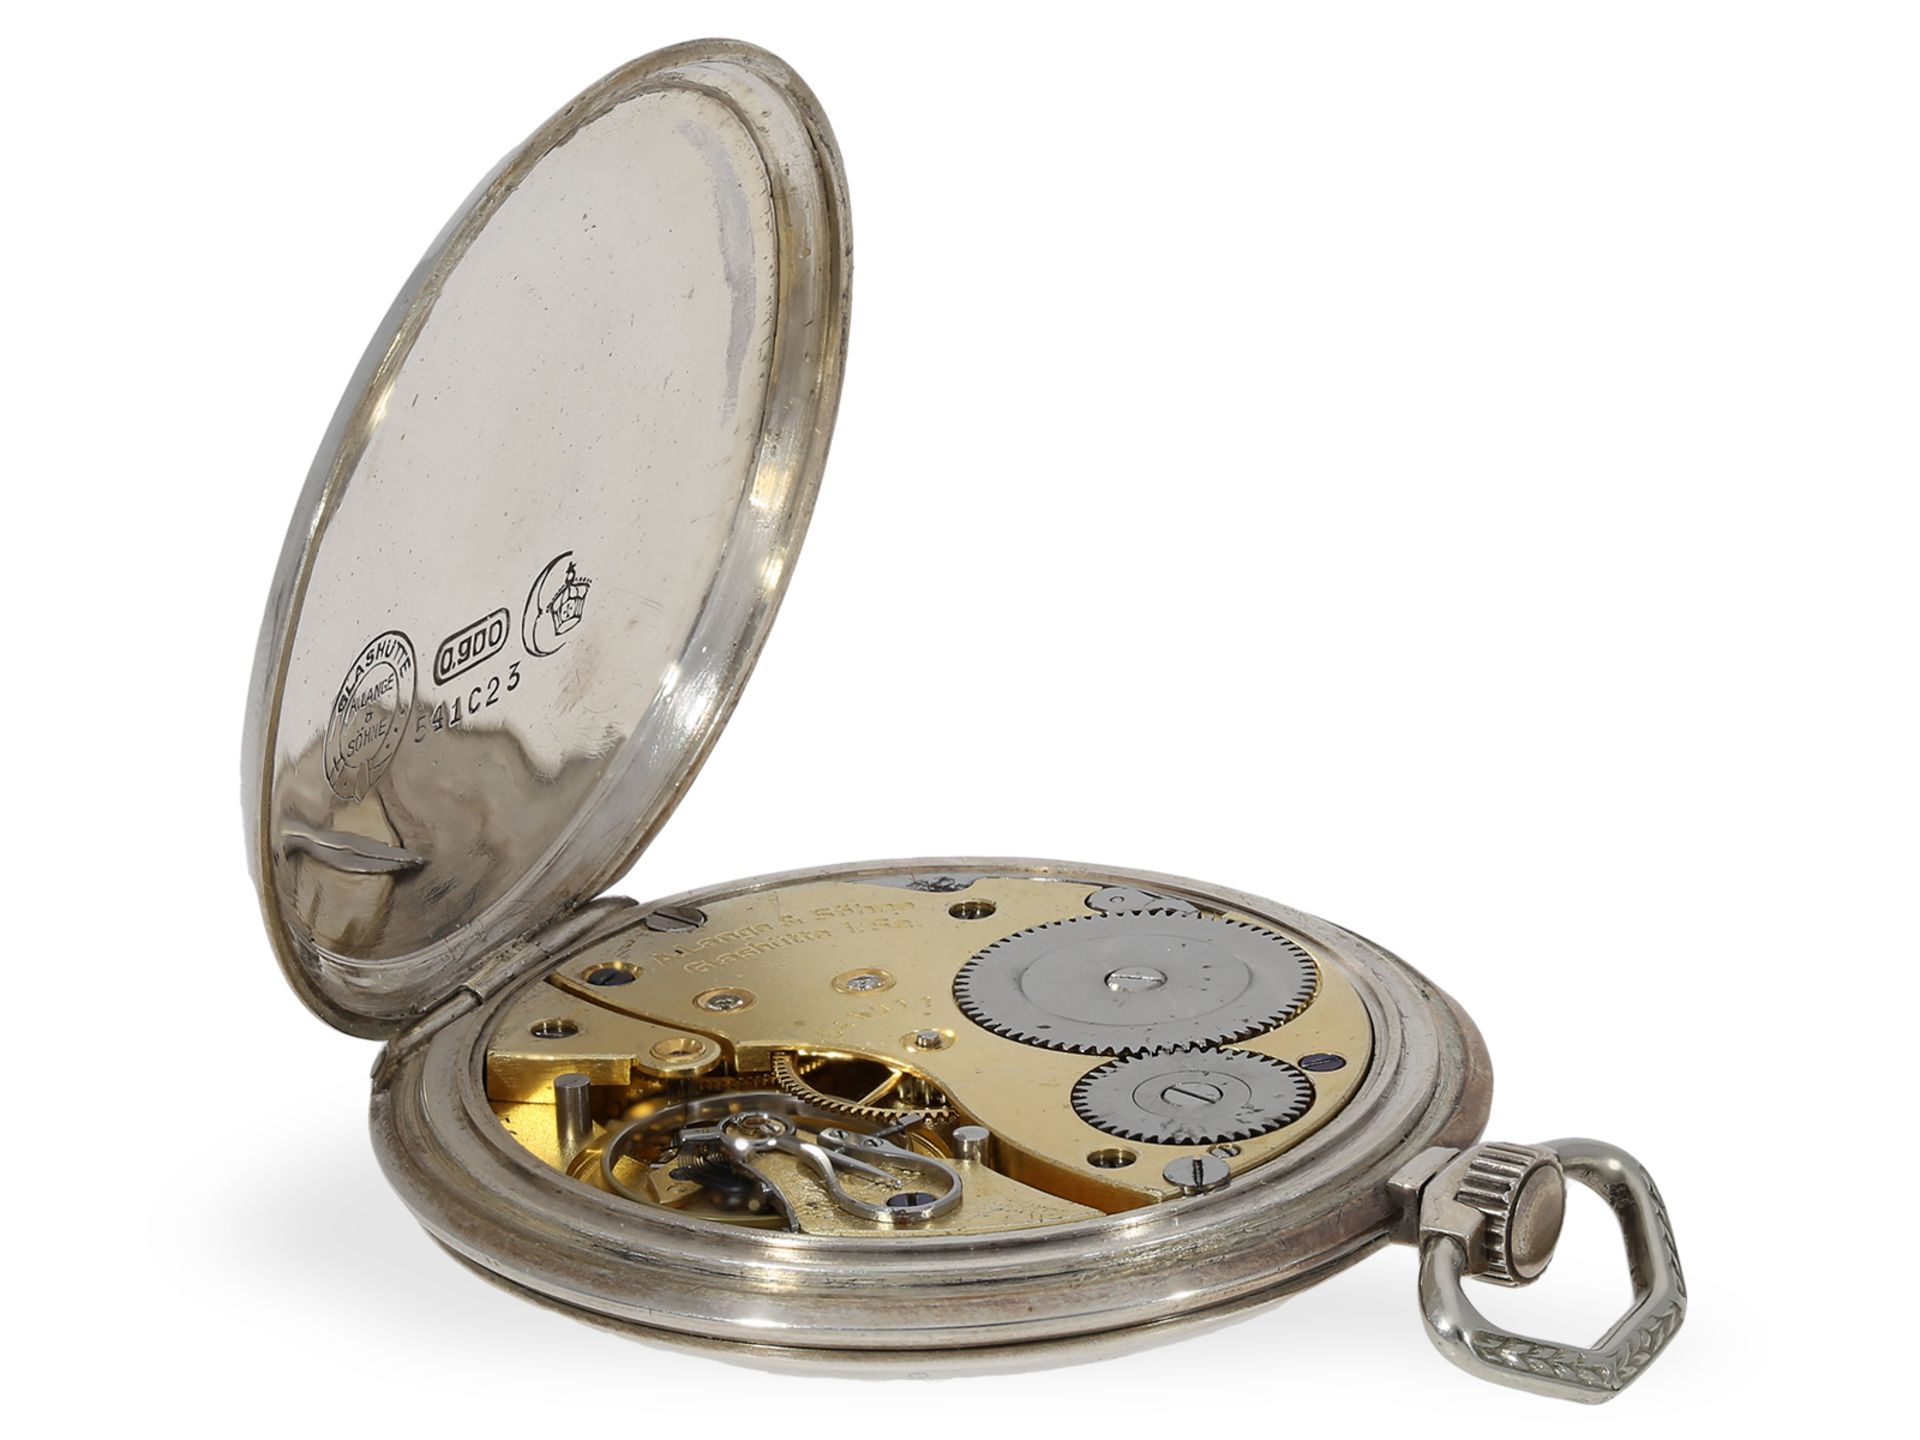 Pocket watch: A. Lange & Söhne Glashütte dress watch with original box and papers - Image 3 of 6